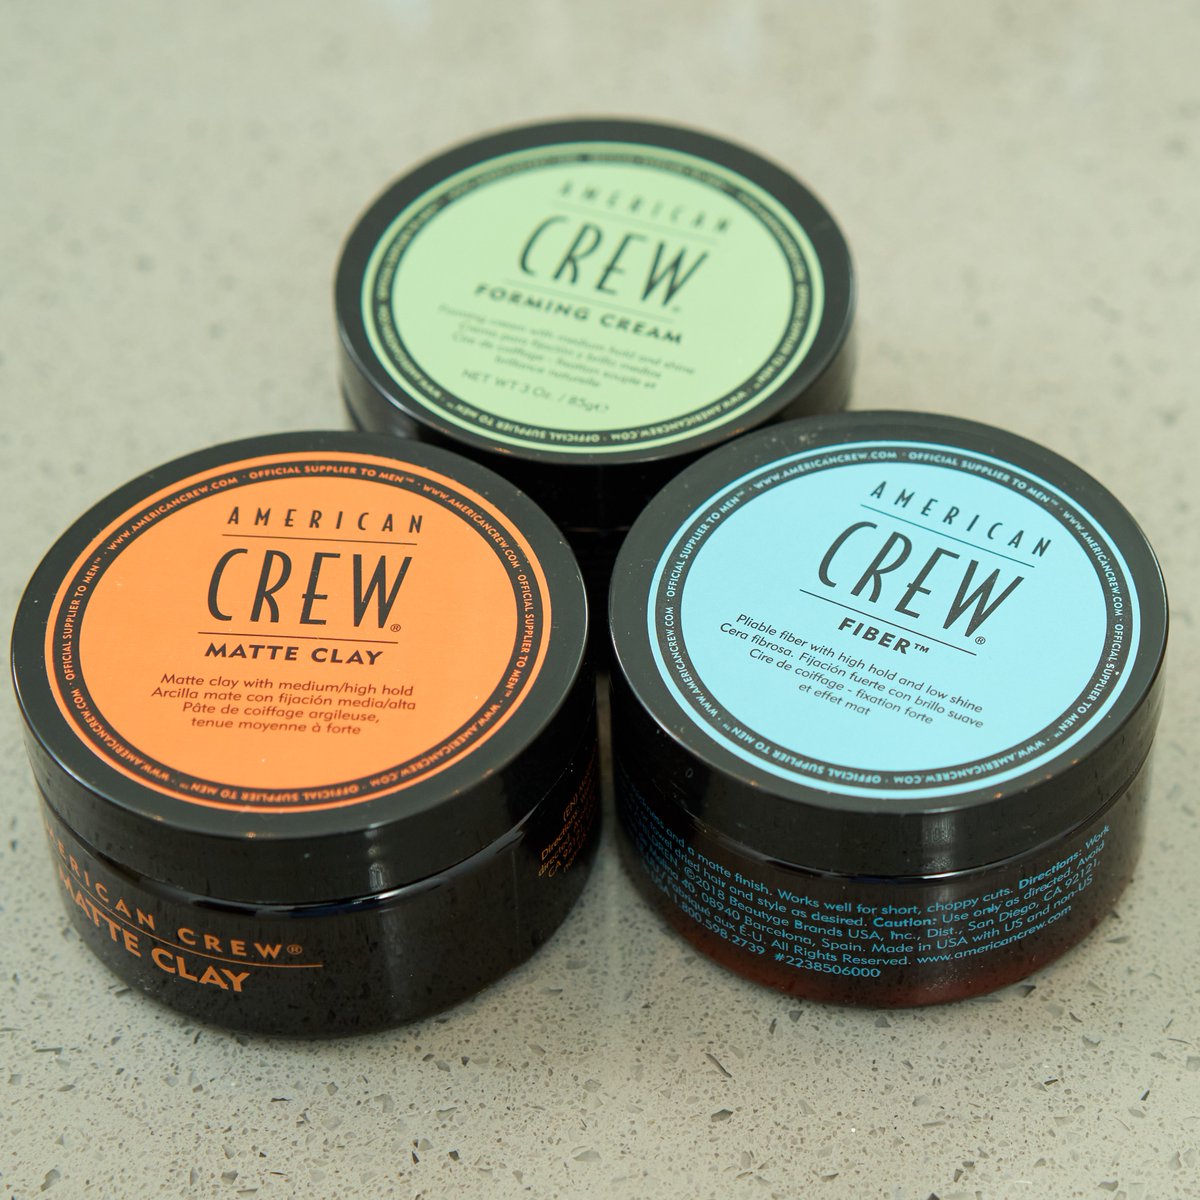 There’s no such thing as a bad hair day when you have @americancrew products – on sale all month long at your local Great Clips salon. 💇‍♂️ #hairproducts #hairstyles